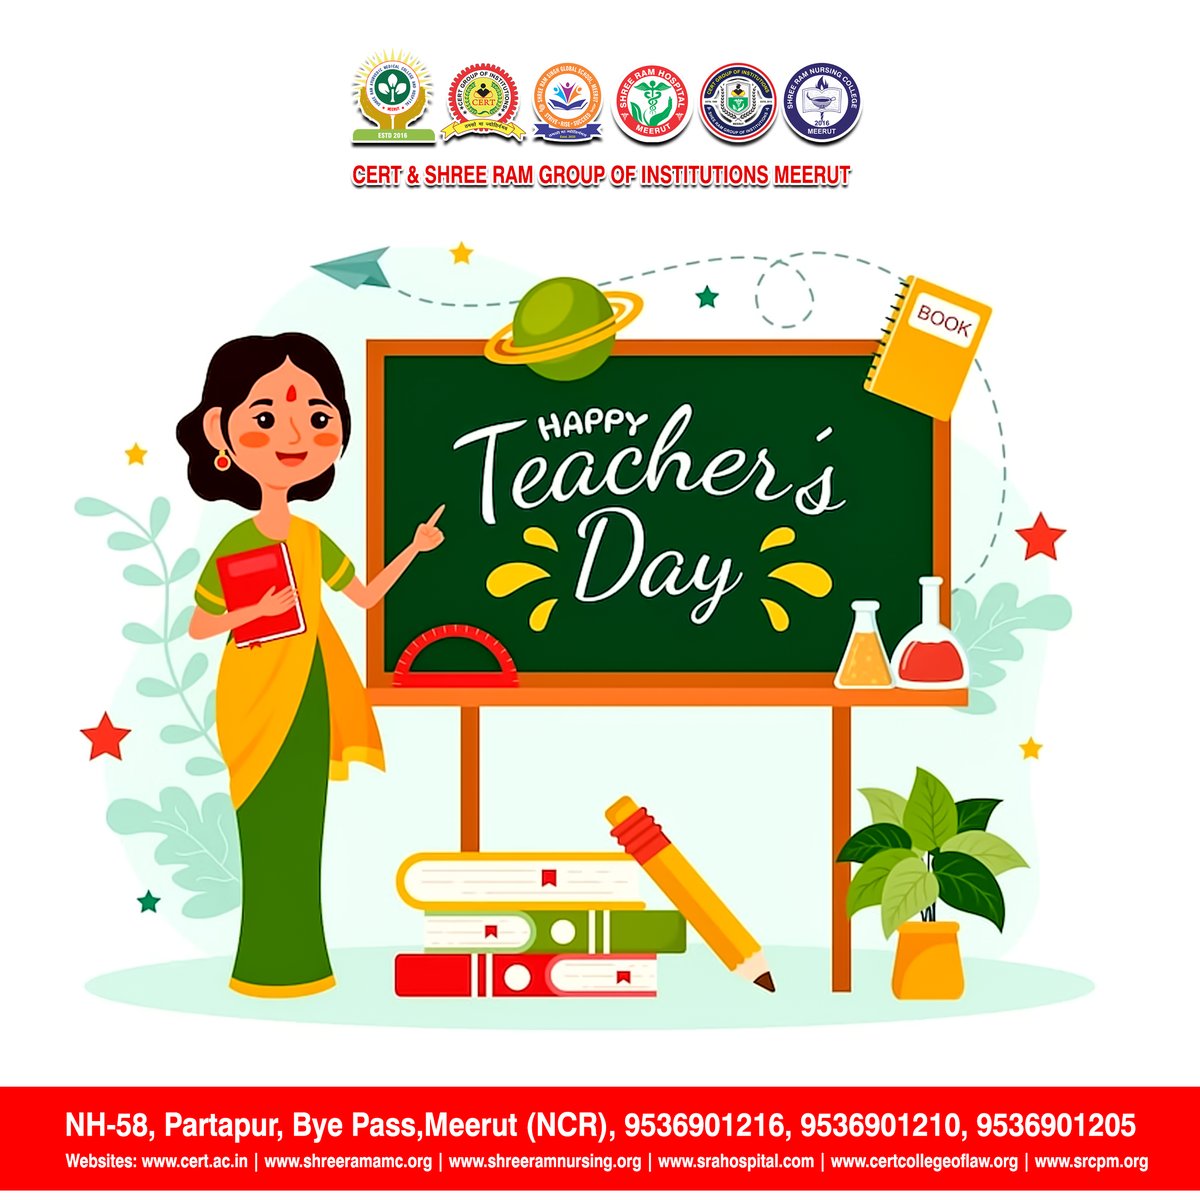 ✨ Happy Teacher's Day 💐💫Empowering minds, shaping futures, and celebrating teachers today and every day! 📚🍎 #teacherappreciation #thankateacher #educationmatters #cert #teacherday2023 #gratefulforteachers #inspiringteachers #worldteachersday #educationmatters #teacherlove